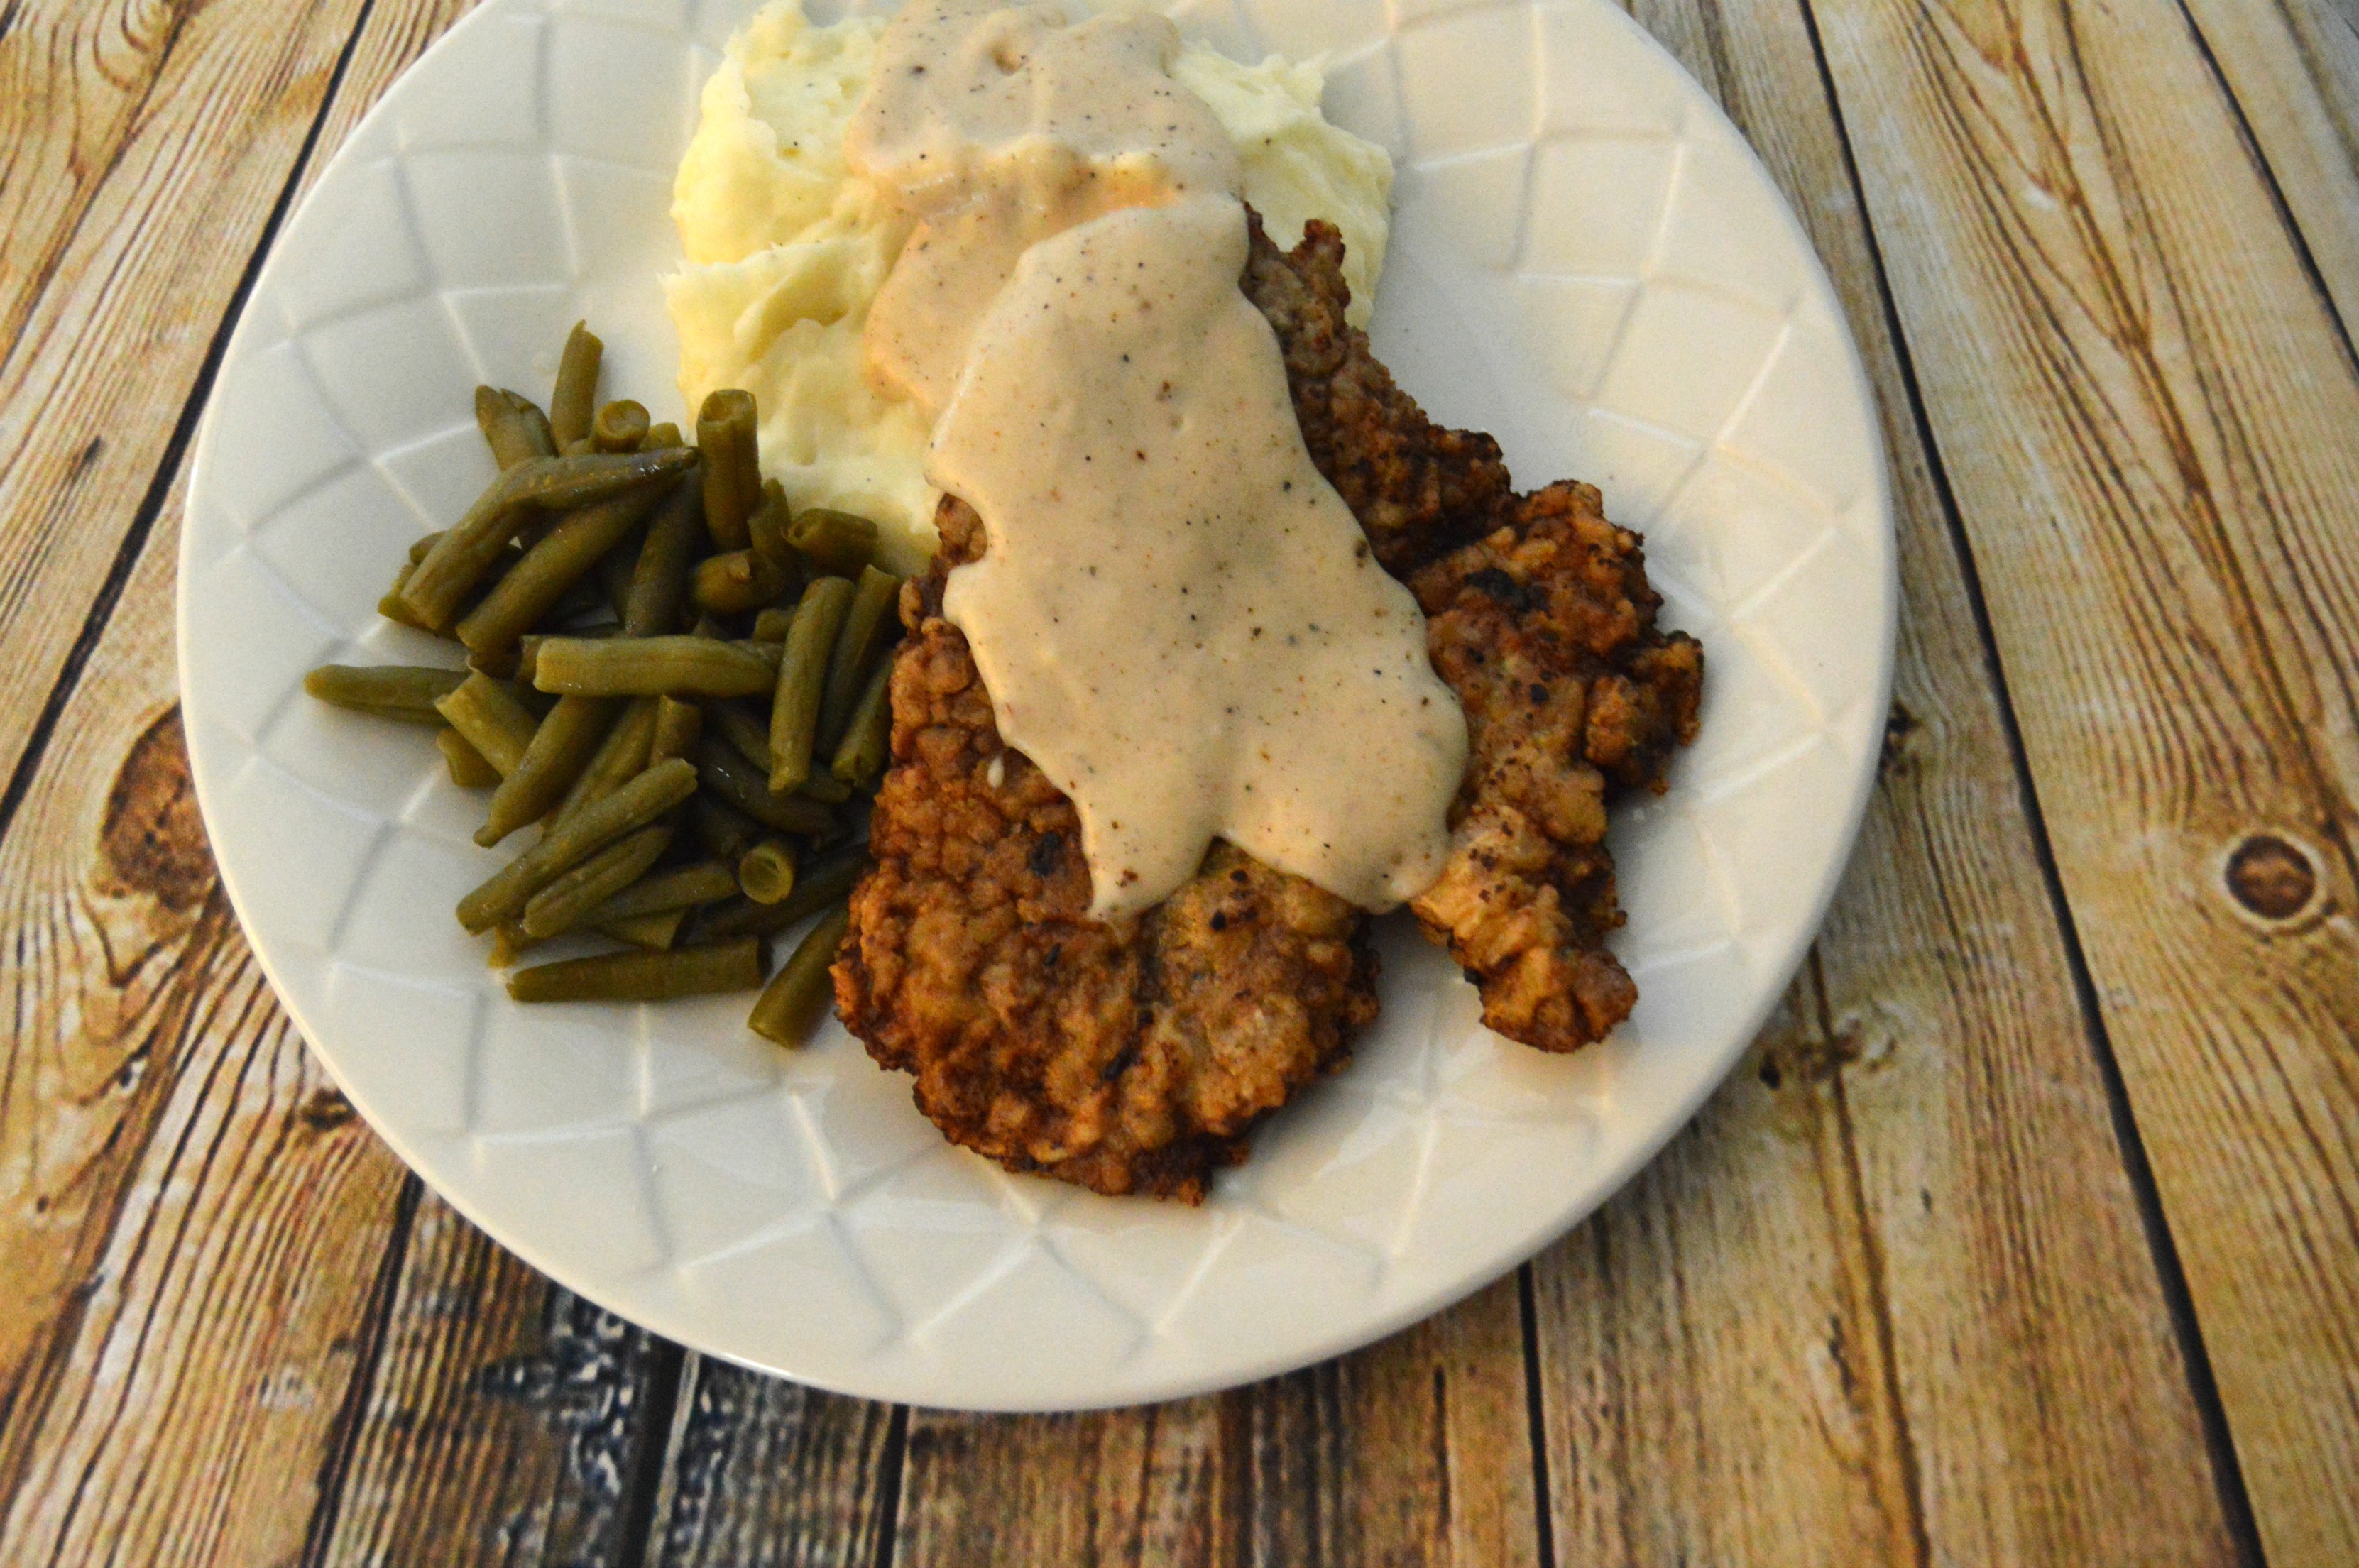 Mistica ranch country fried steak